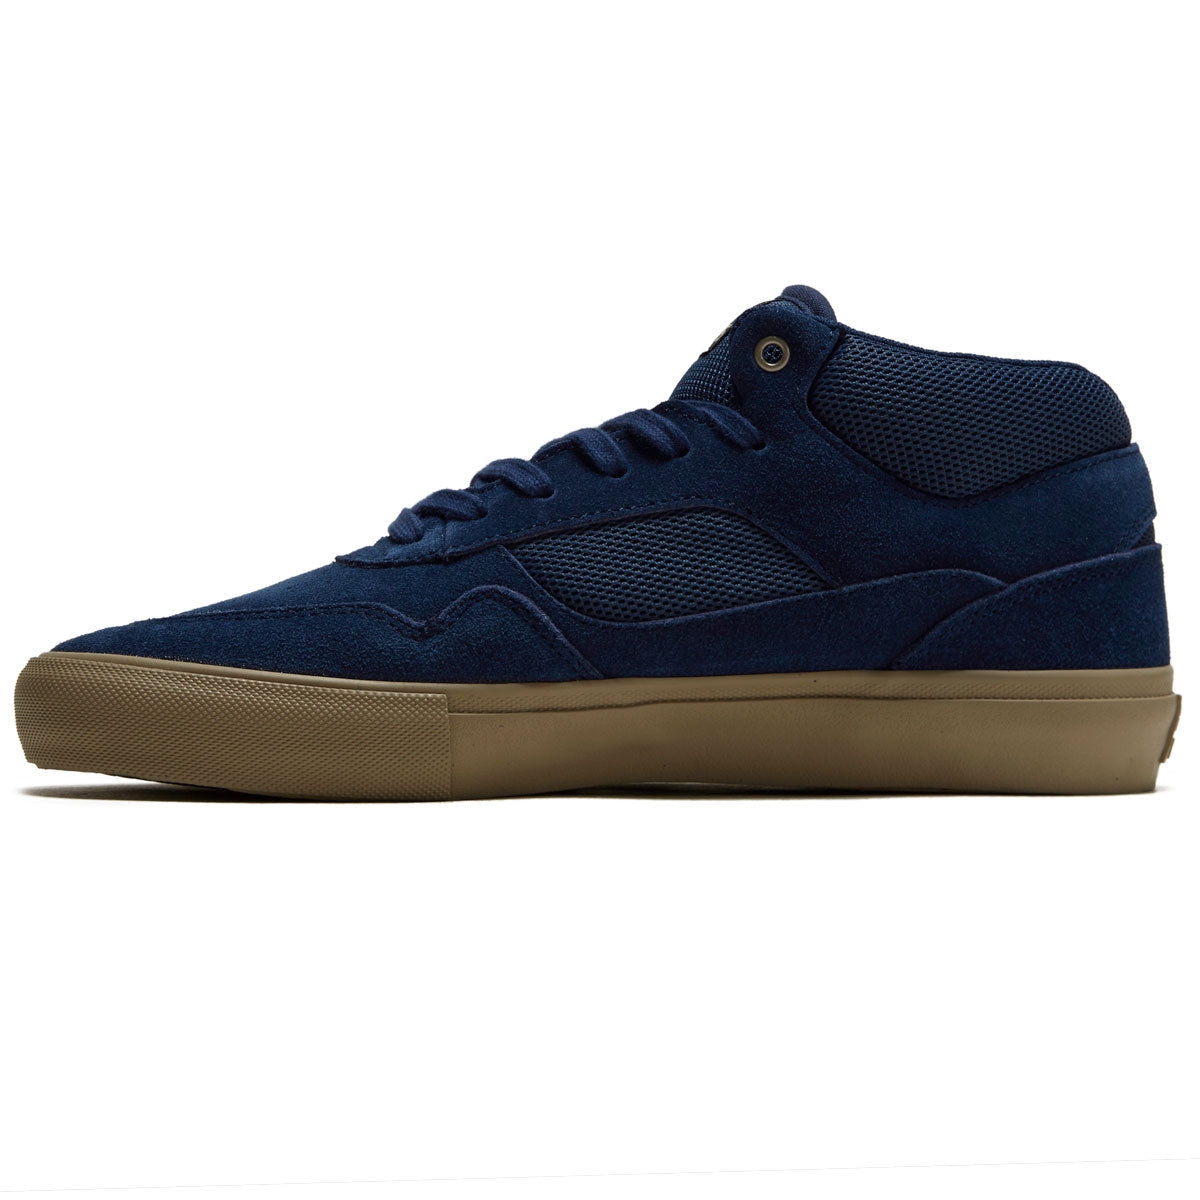 Opus Standard Mid Shoes - Navy/Cream image 2